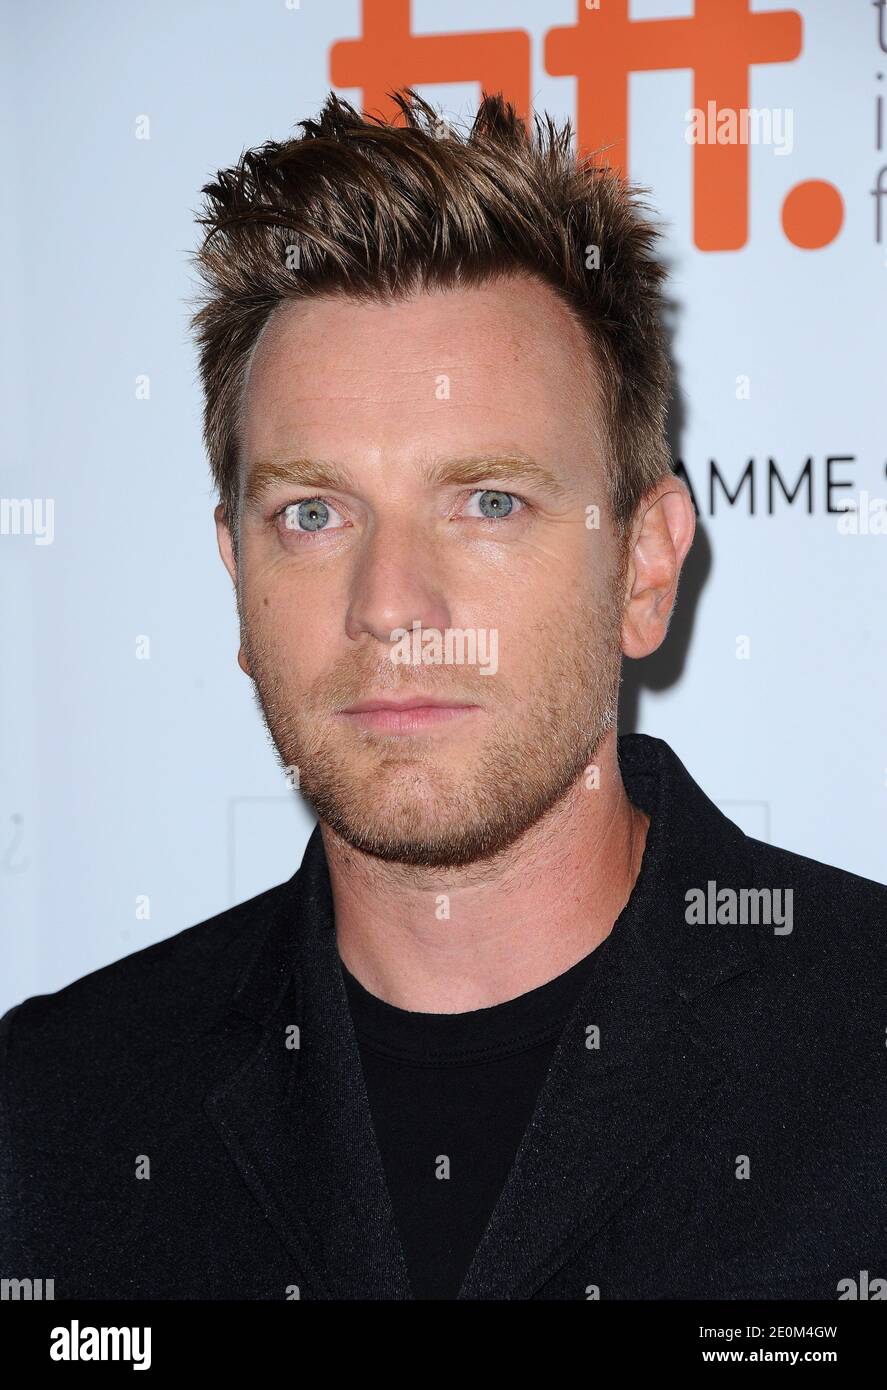 Ewan McGregor attends 'The Impossible' screening during the 37th Toronto International Film Festival TIFF, in Toronto, Canada on September 9, 2012. Photo by Lionel Hahn/ABACAPRESS.COM Stock Photo